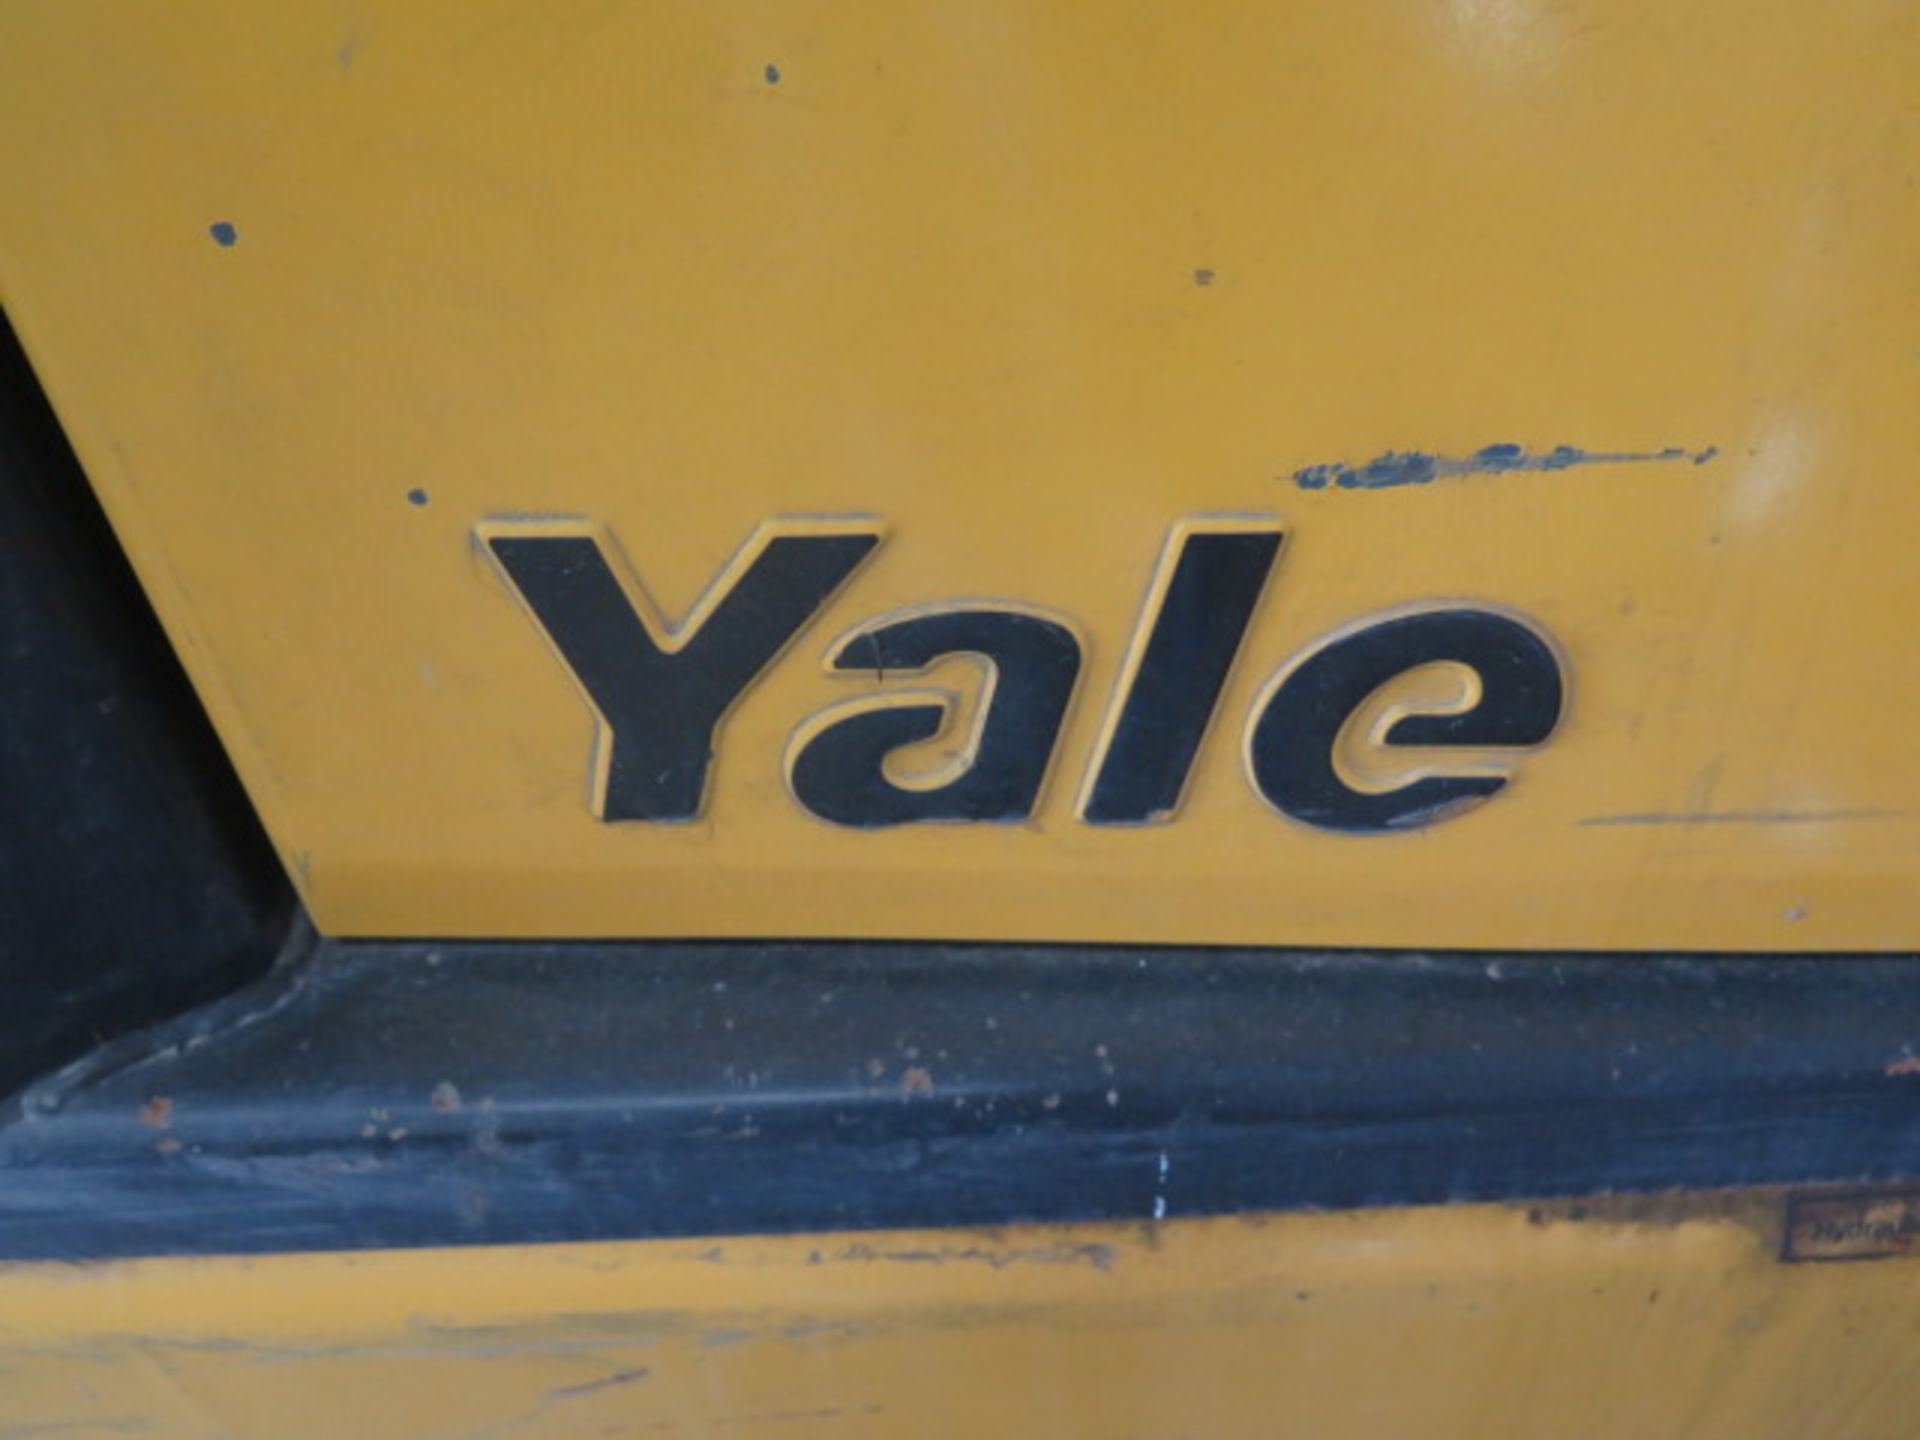 Yale GLC120MFNSAE085 12,000 Lb Cap LPG Forklift s/n N547180 w/ 3-Stage Mast, 170” Lift Height, Solid - Image 6 of 14